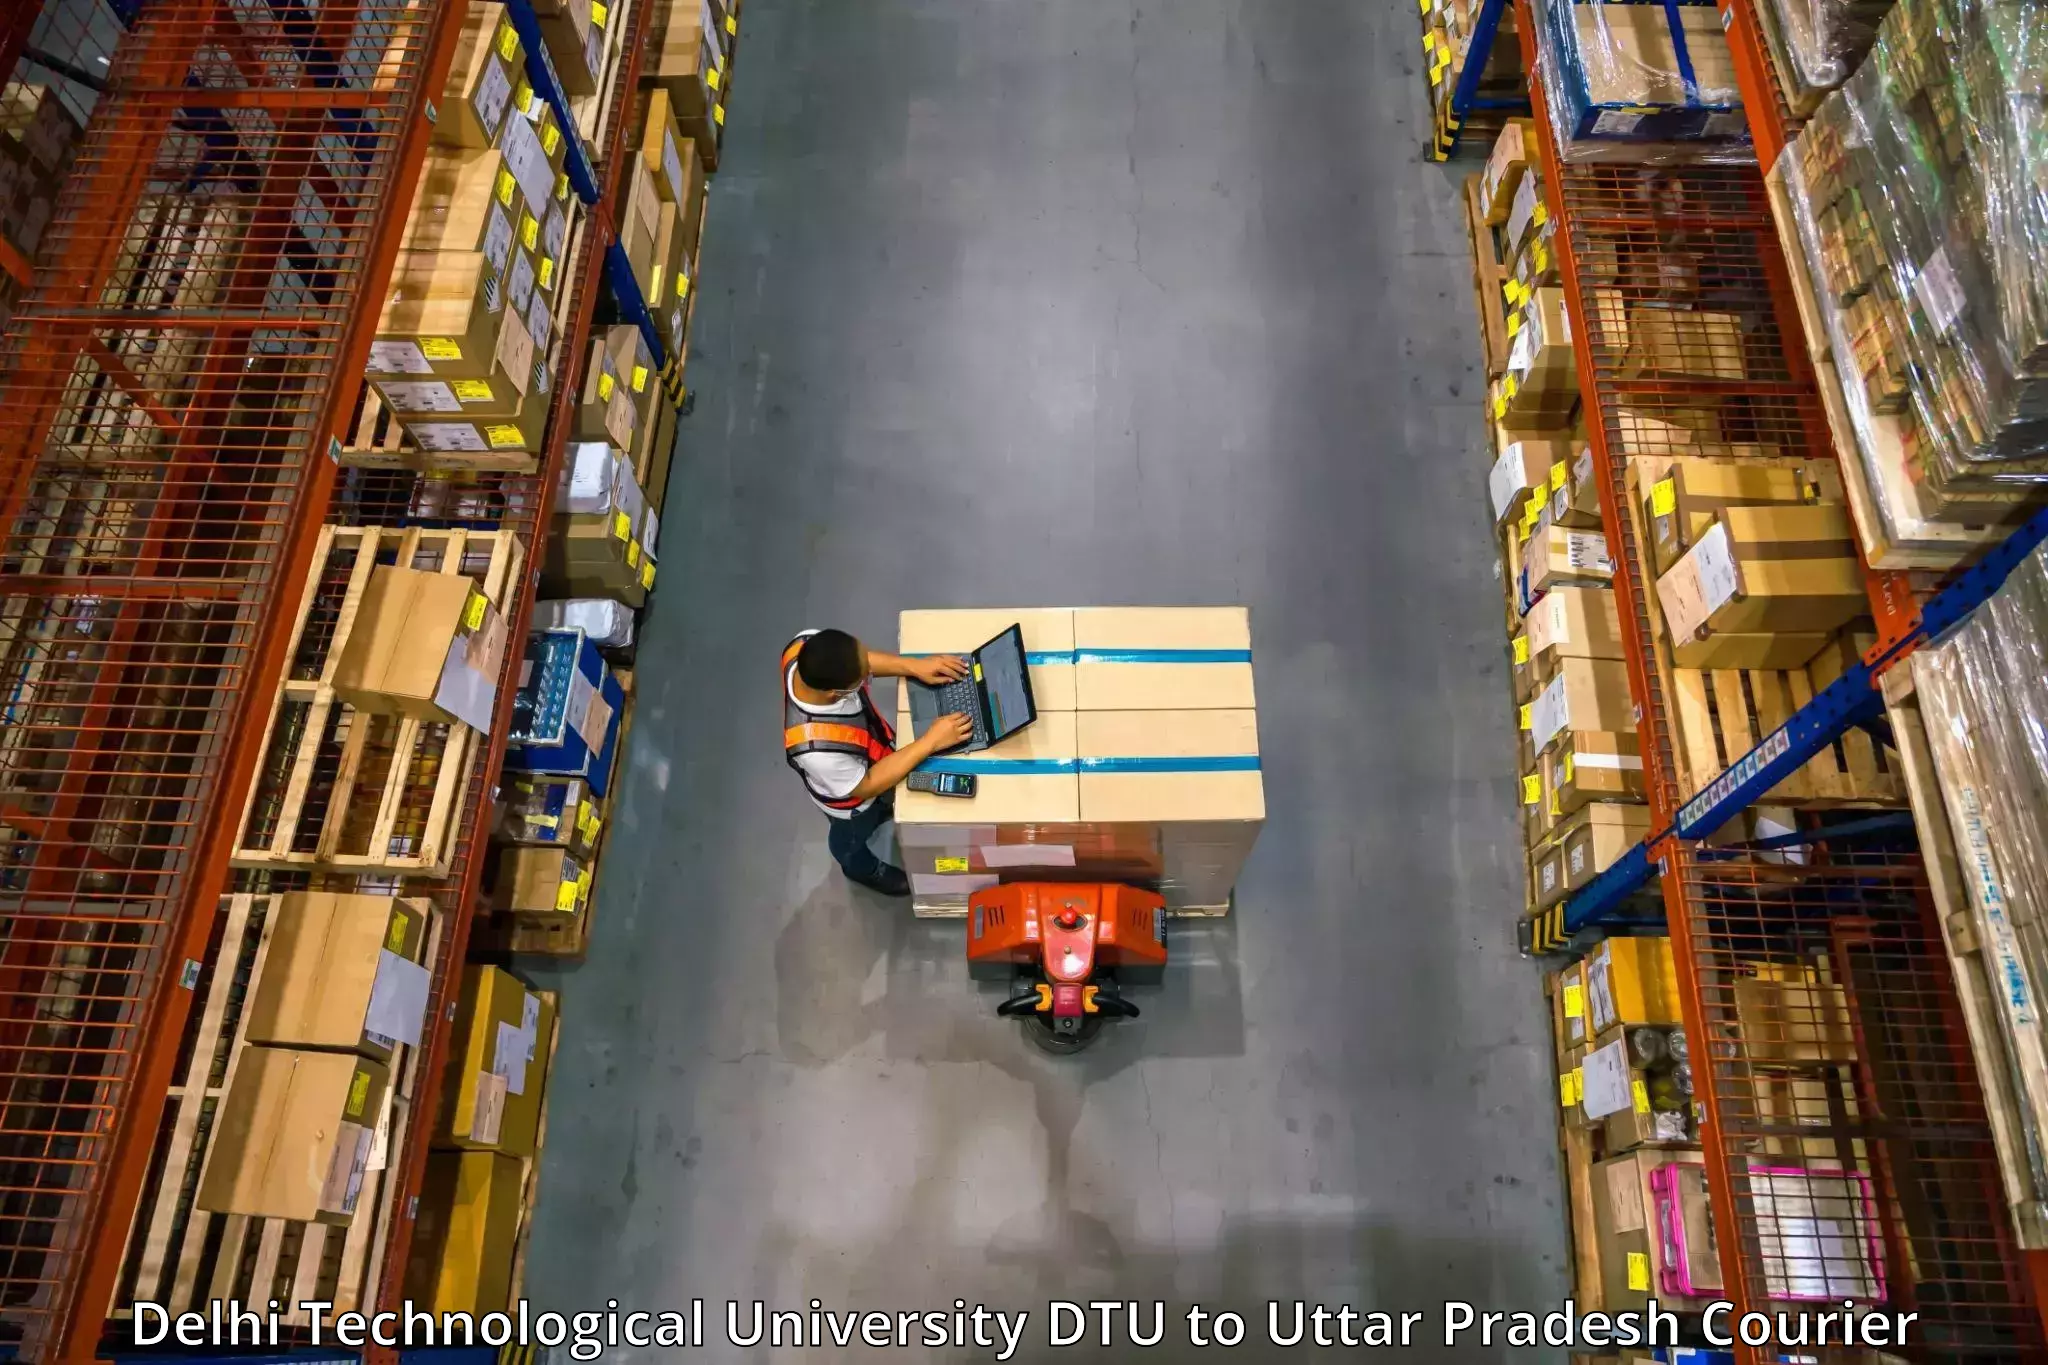 Quality relocation assistance in Delhi Technological University DTU to Agra